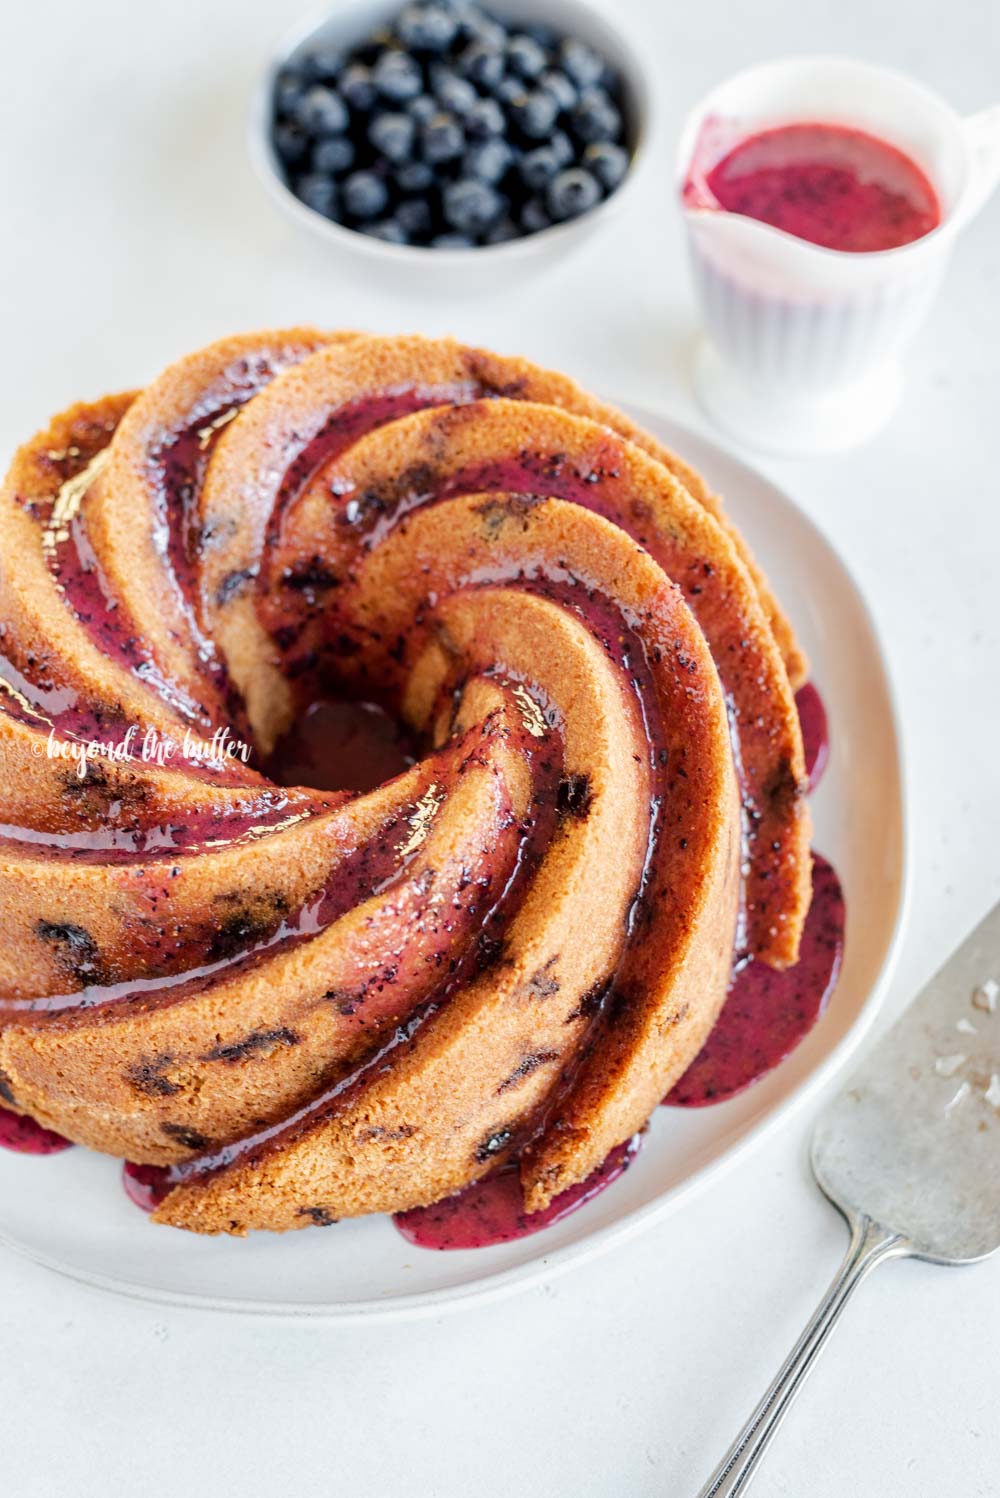 Angled image of super easy blueberry bundt cake with blueberry glaze drizzled over the top | All Images © Beyond the Butter, LLC